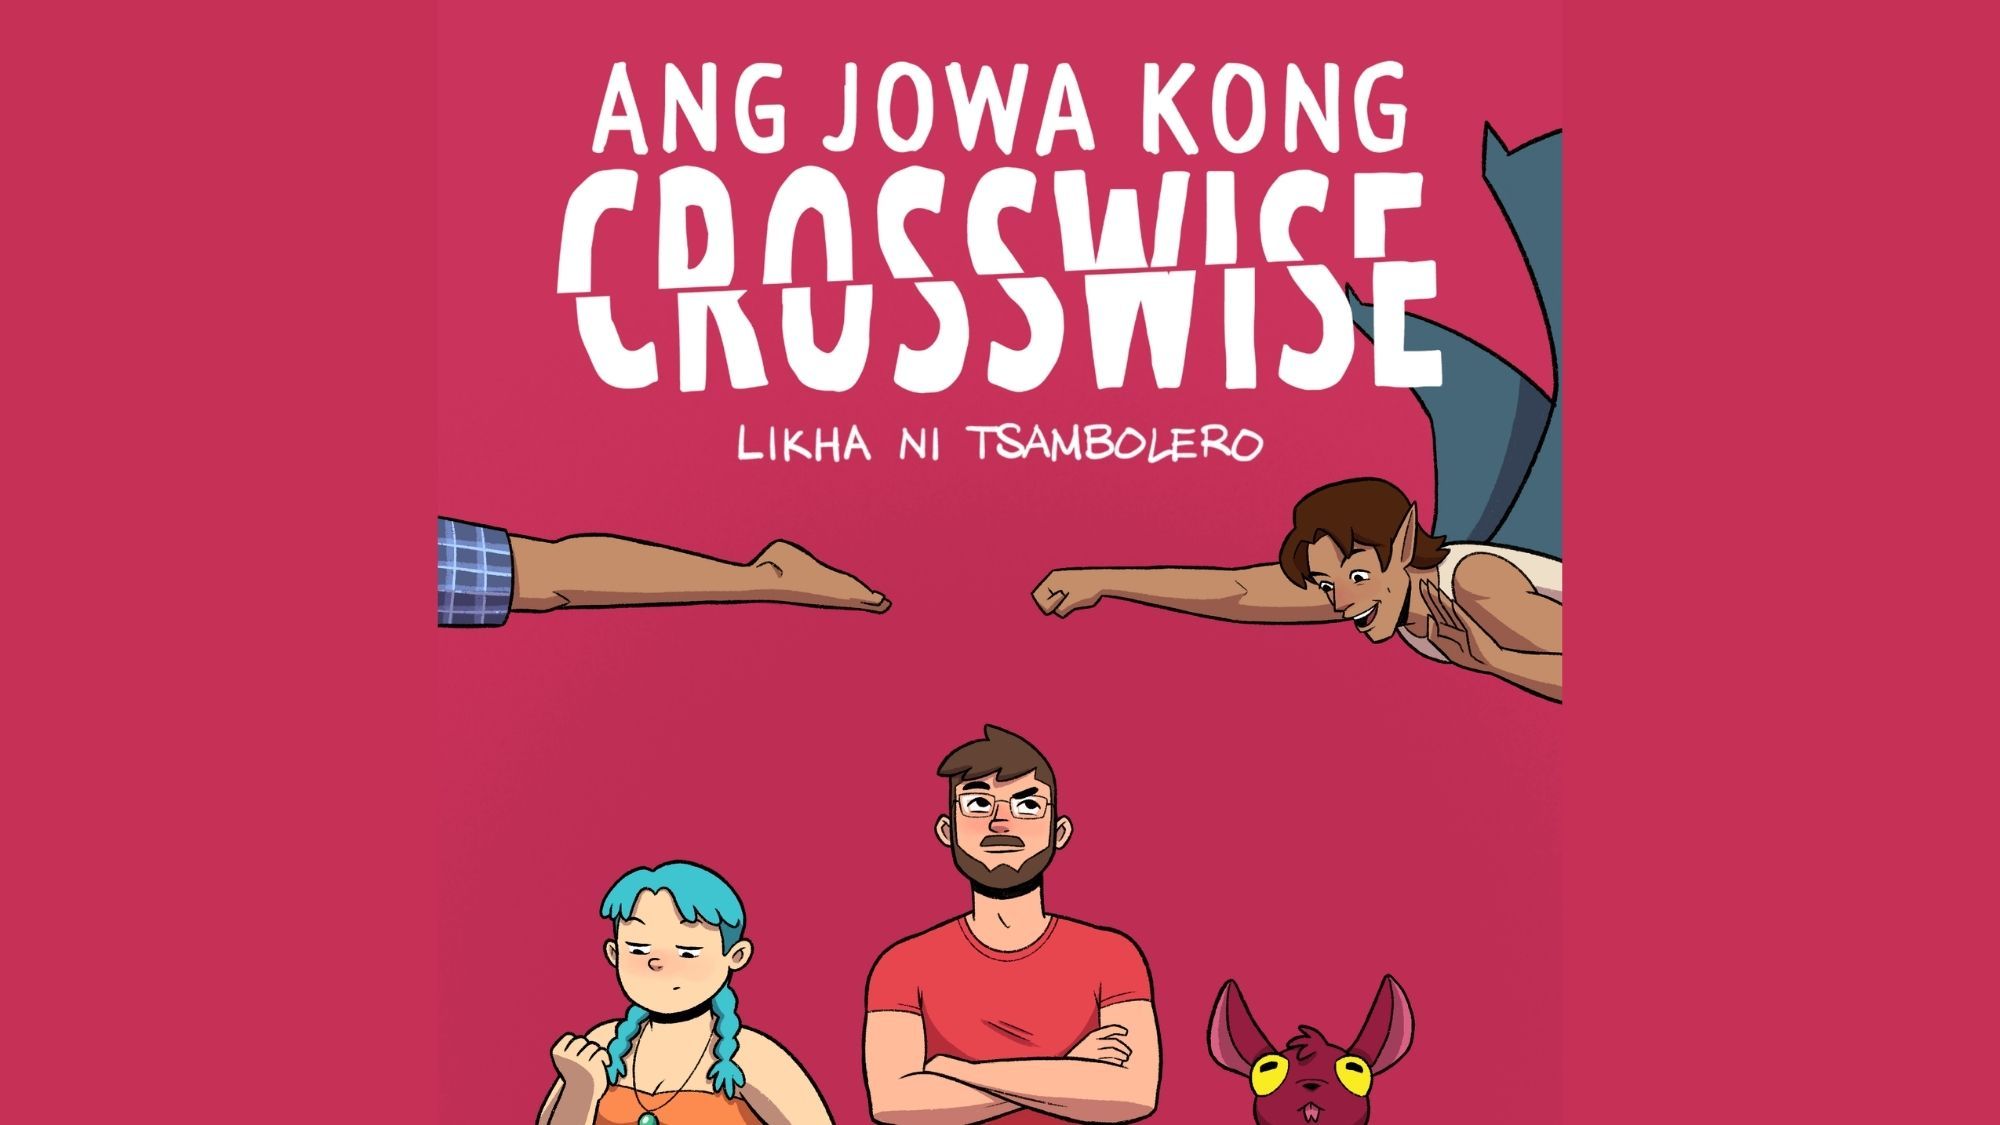 Life as a gay aswang explored in comic series from Penlab